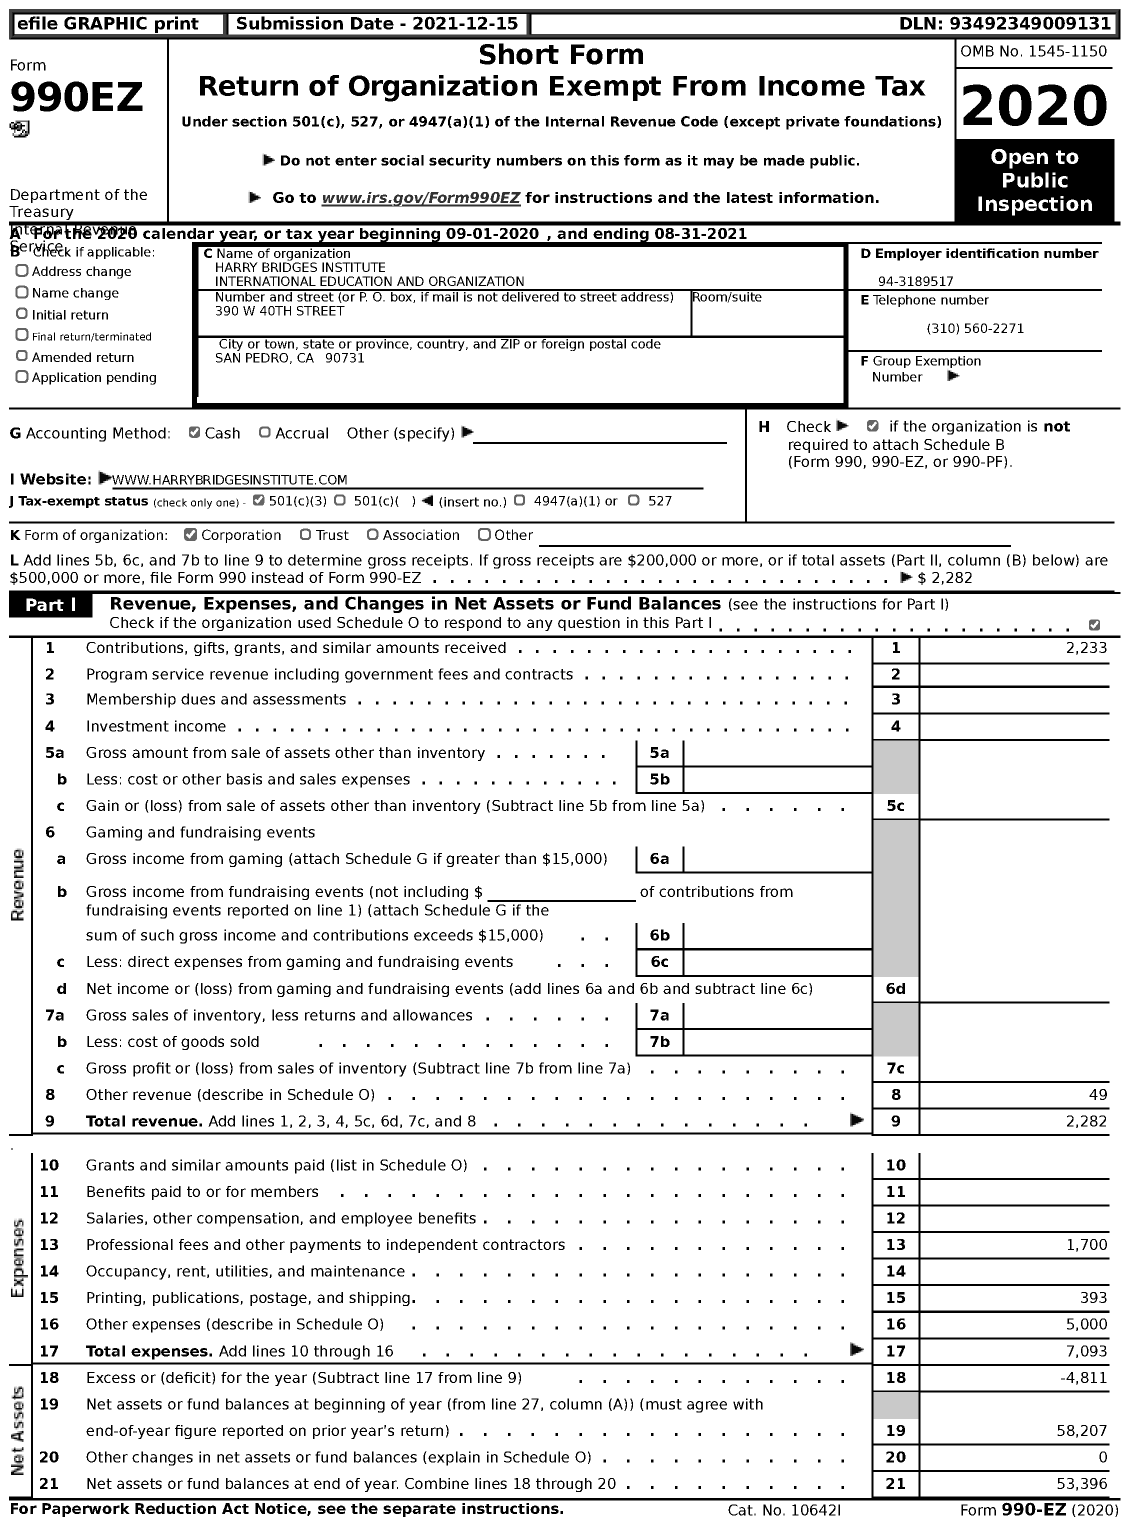 Image of first page of 2020 Form 990EZ for Harry Bridges Institute International Education and Organization